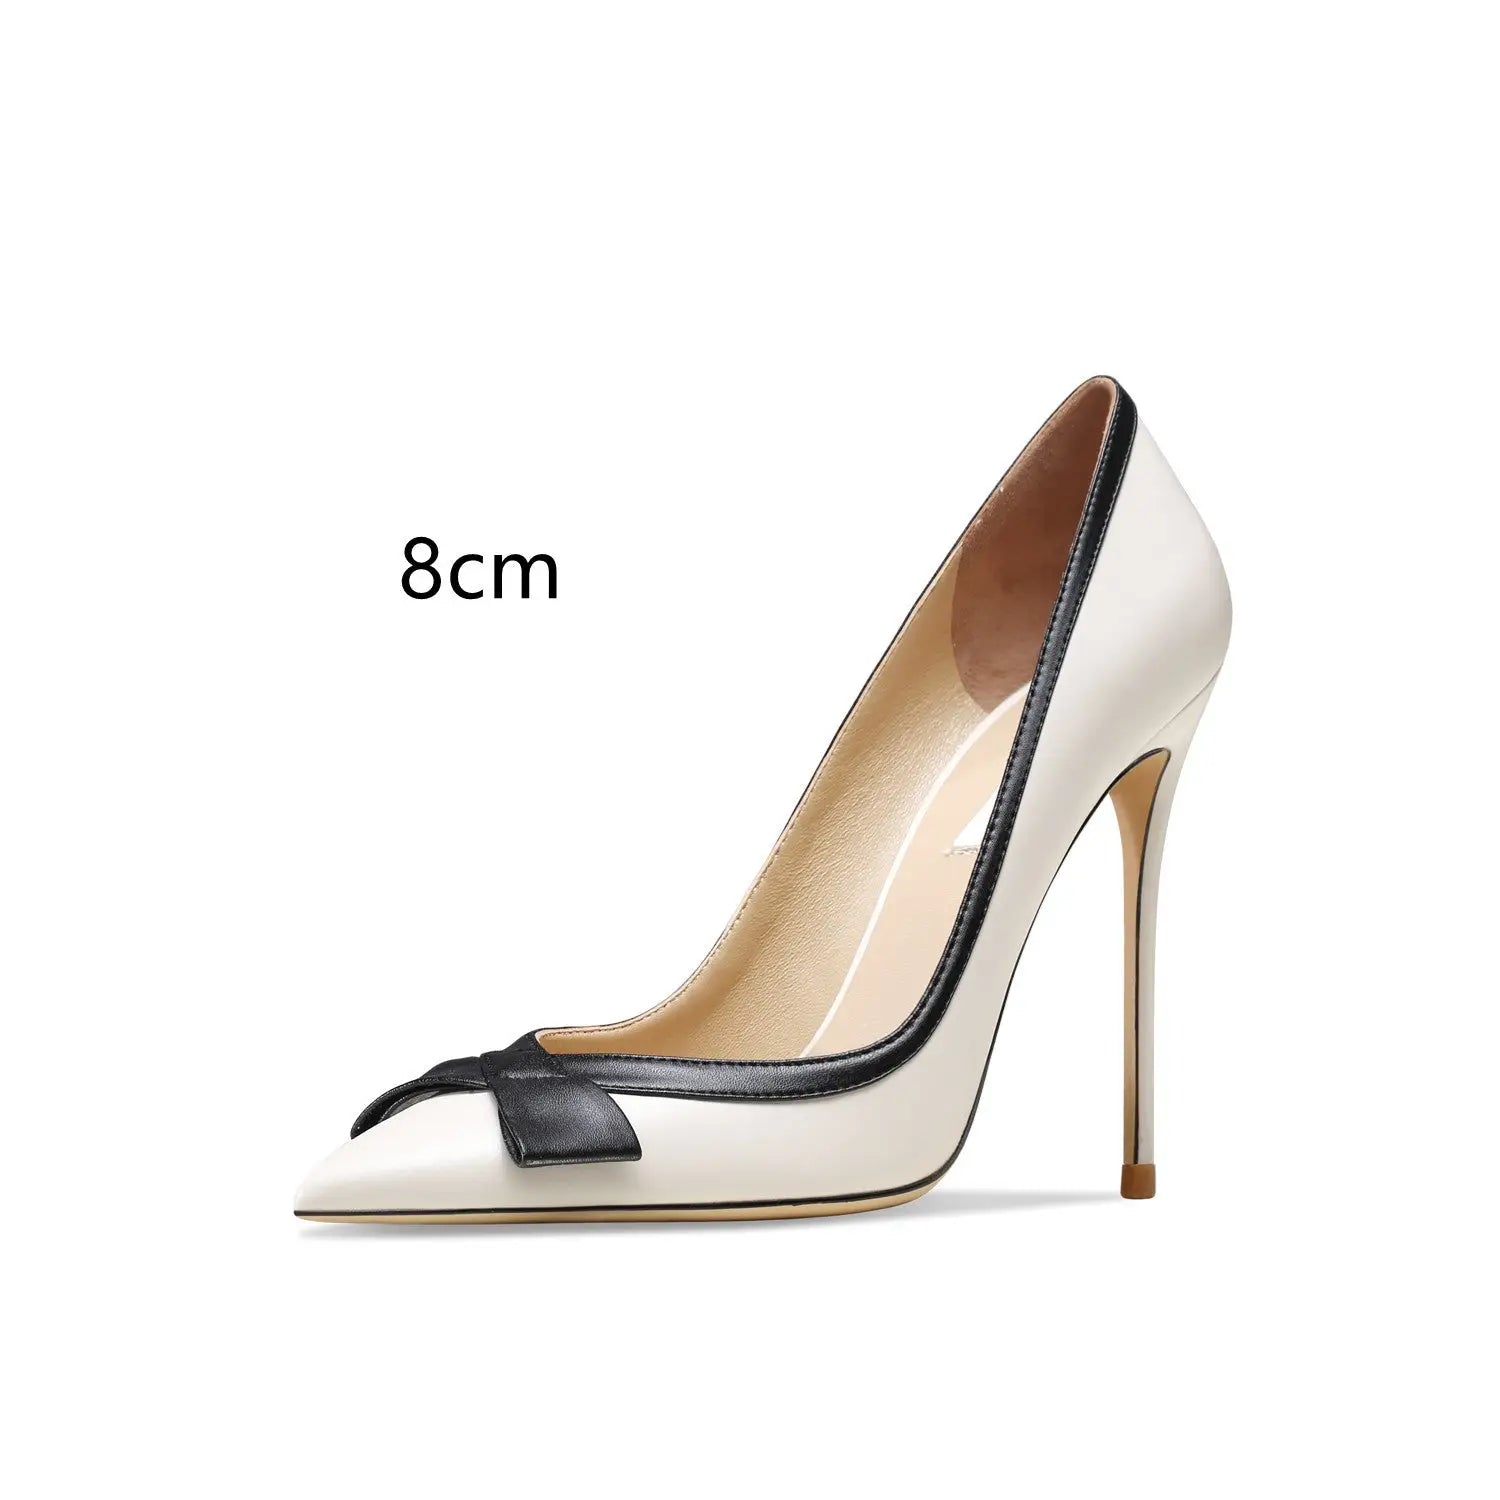 Perfect leather stiletto high heels - apricot / surface 8cm / 33 - pumps